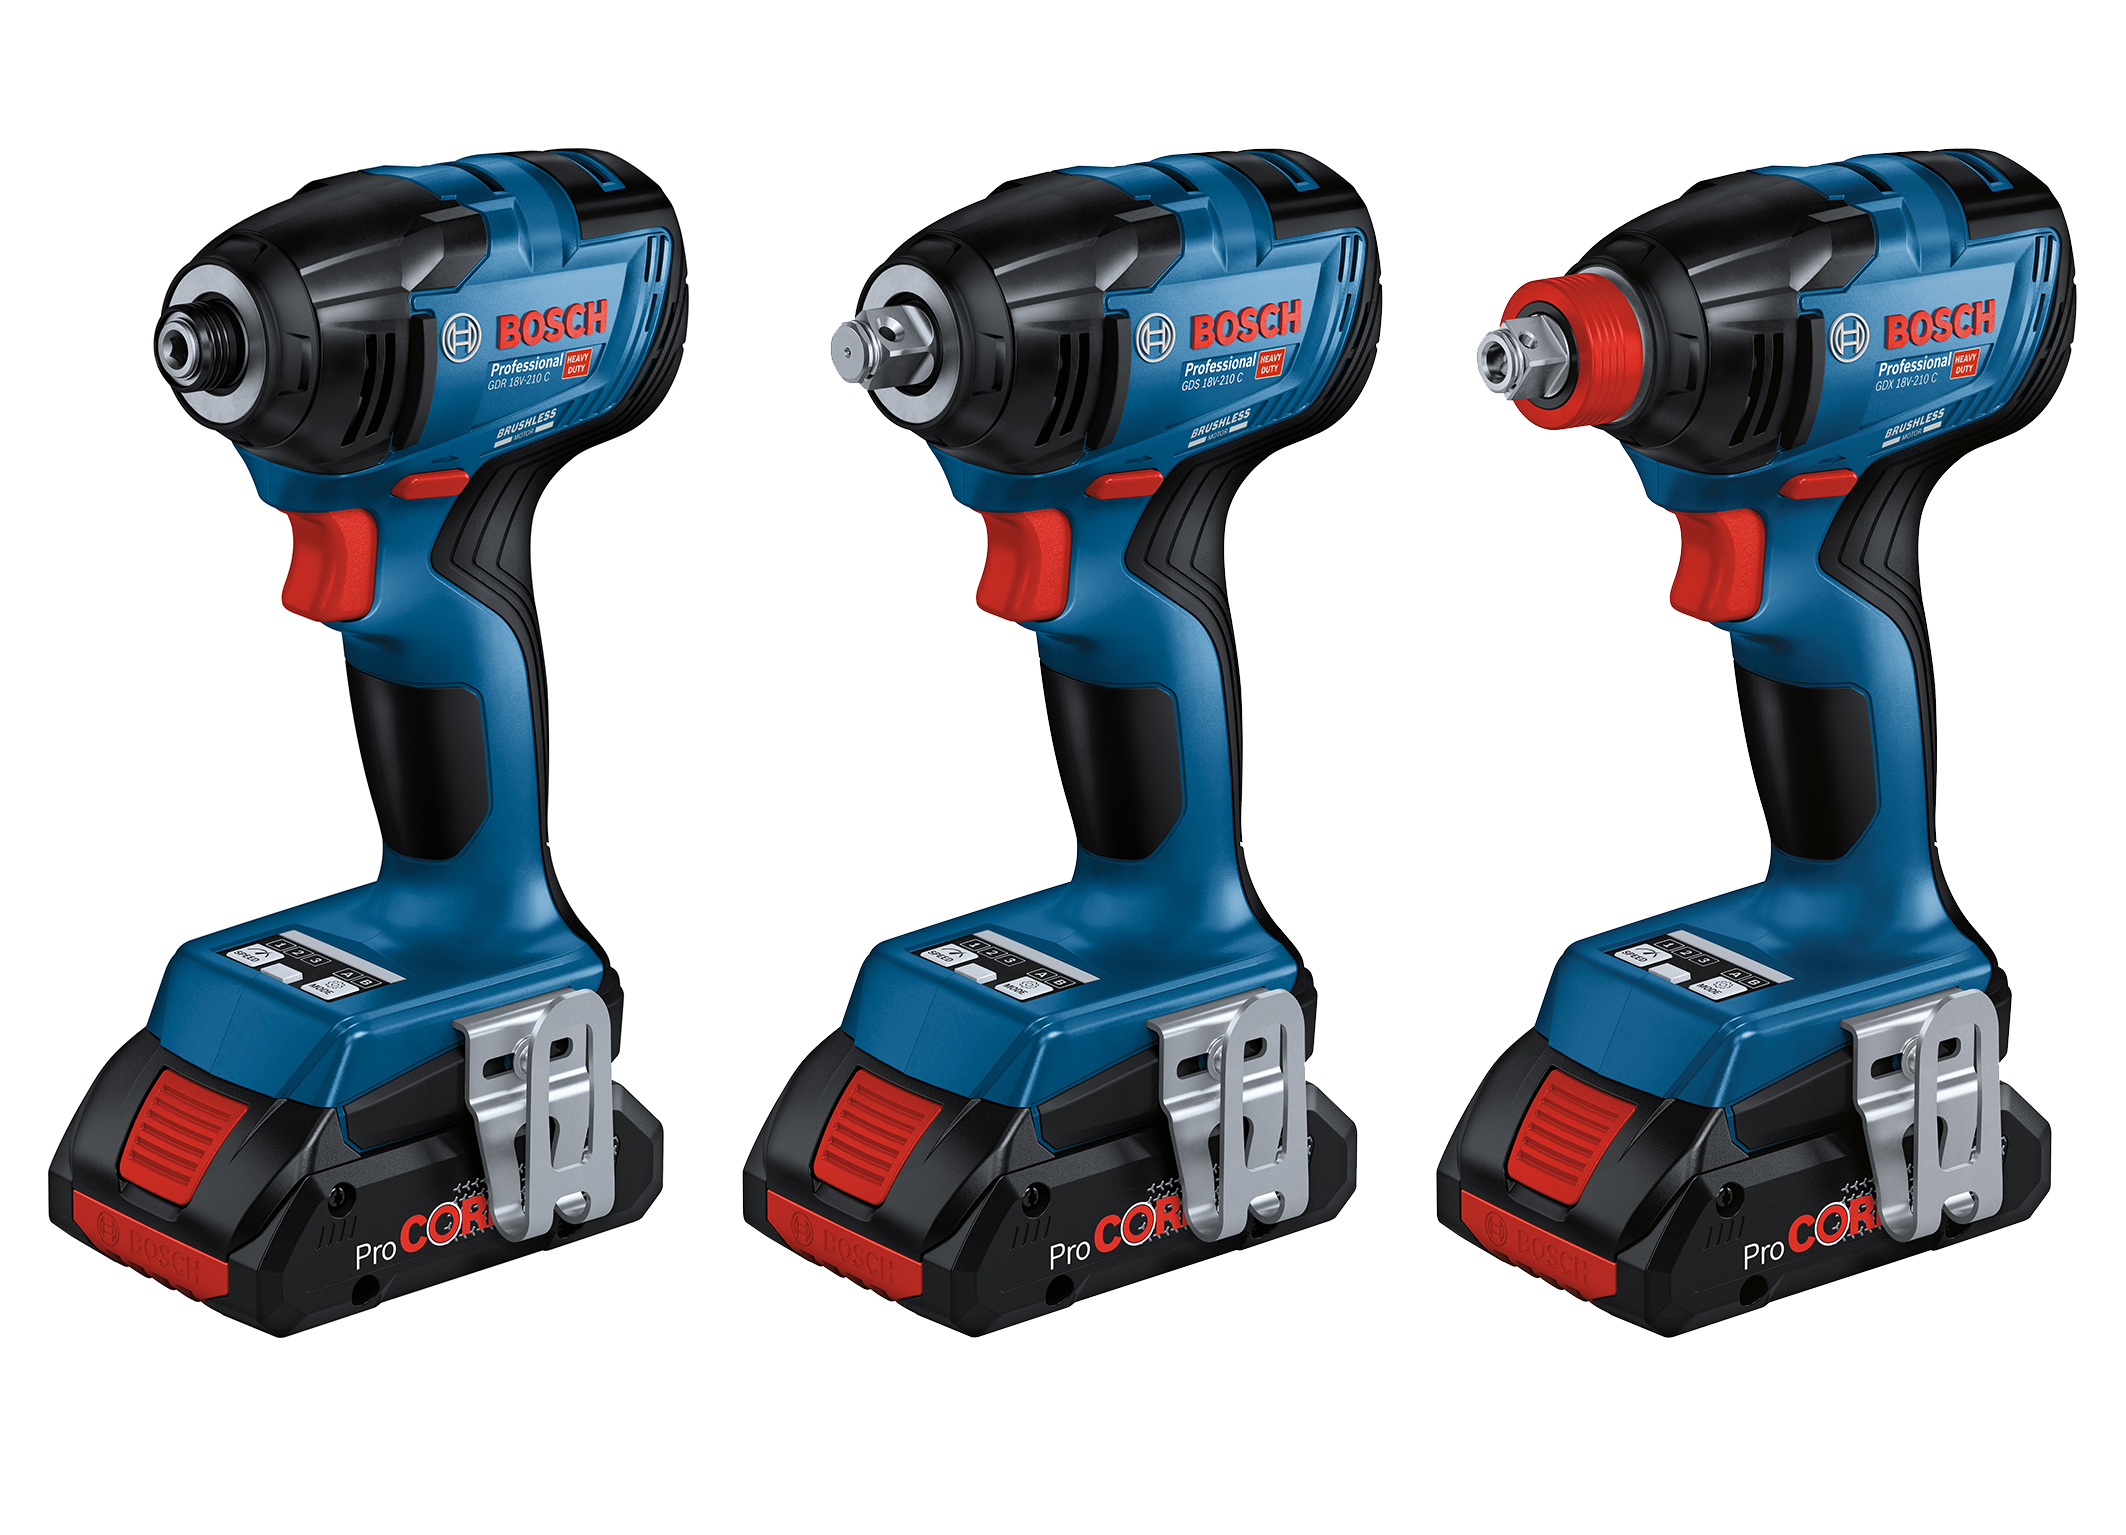 Preventing damaged screws and surfaces: New cordless Bosch impact wrenches for professionals 